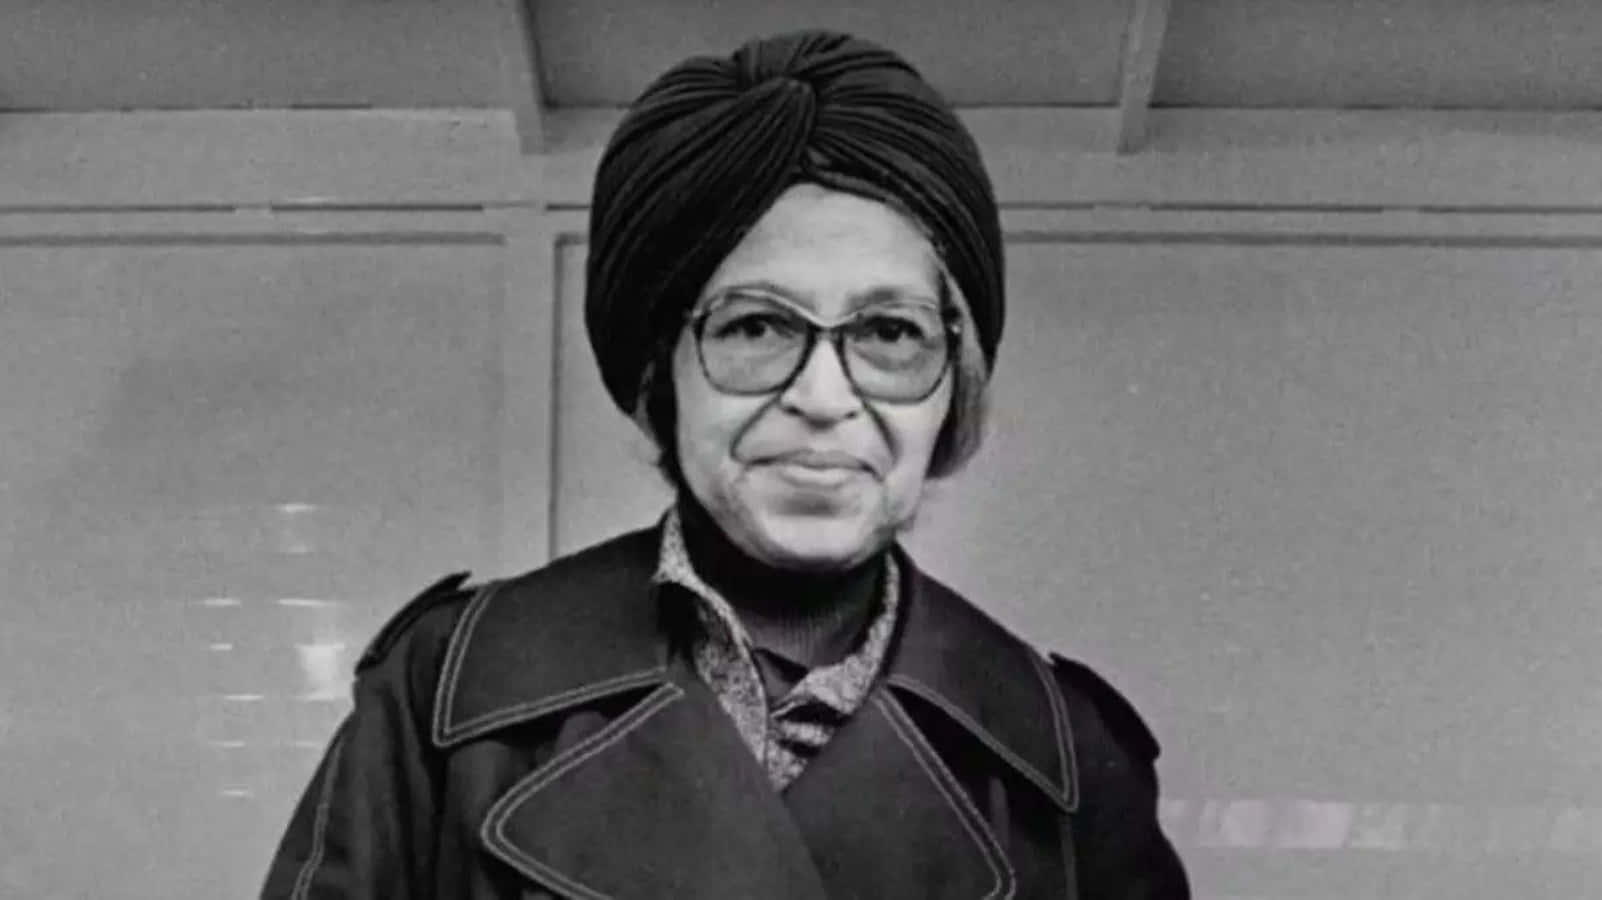 A Woman In A Turban And Glasses